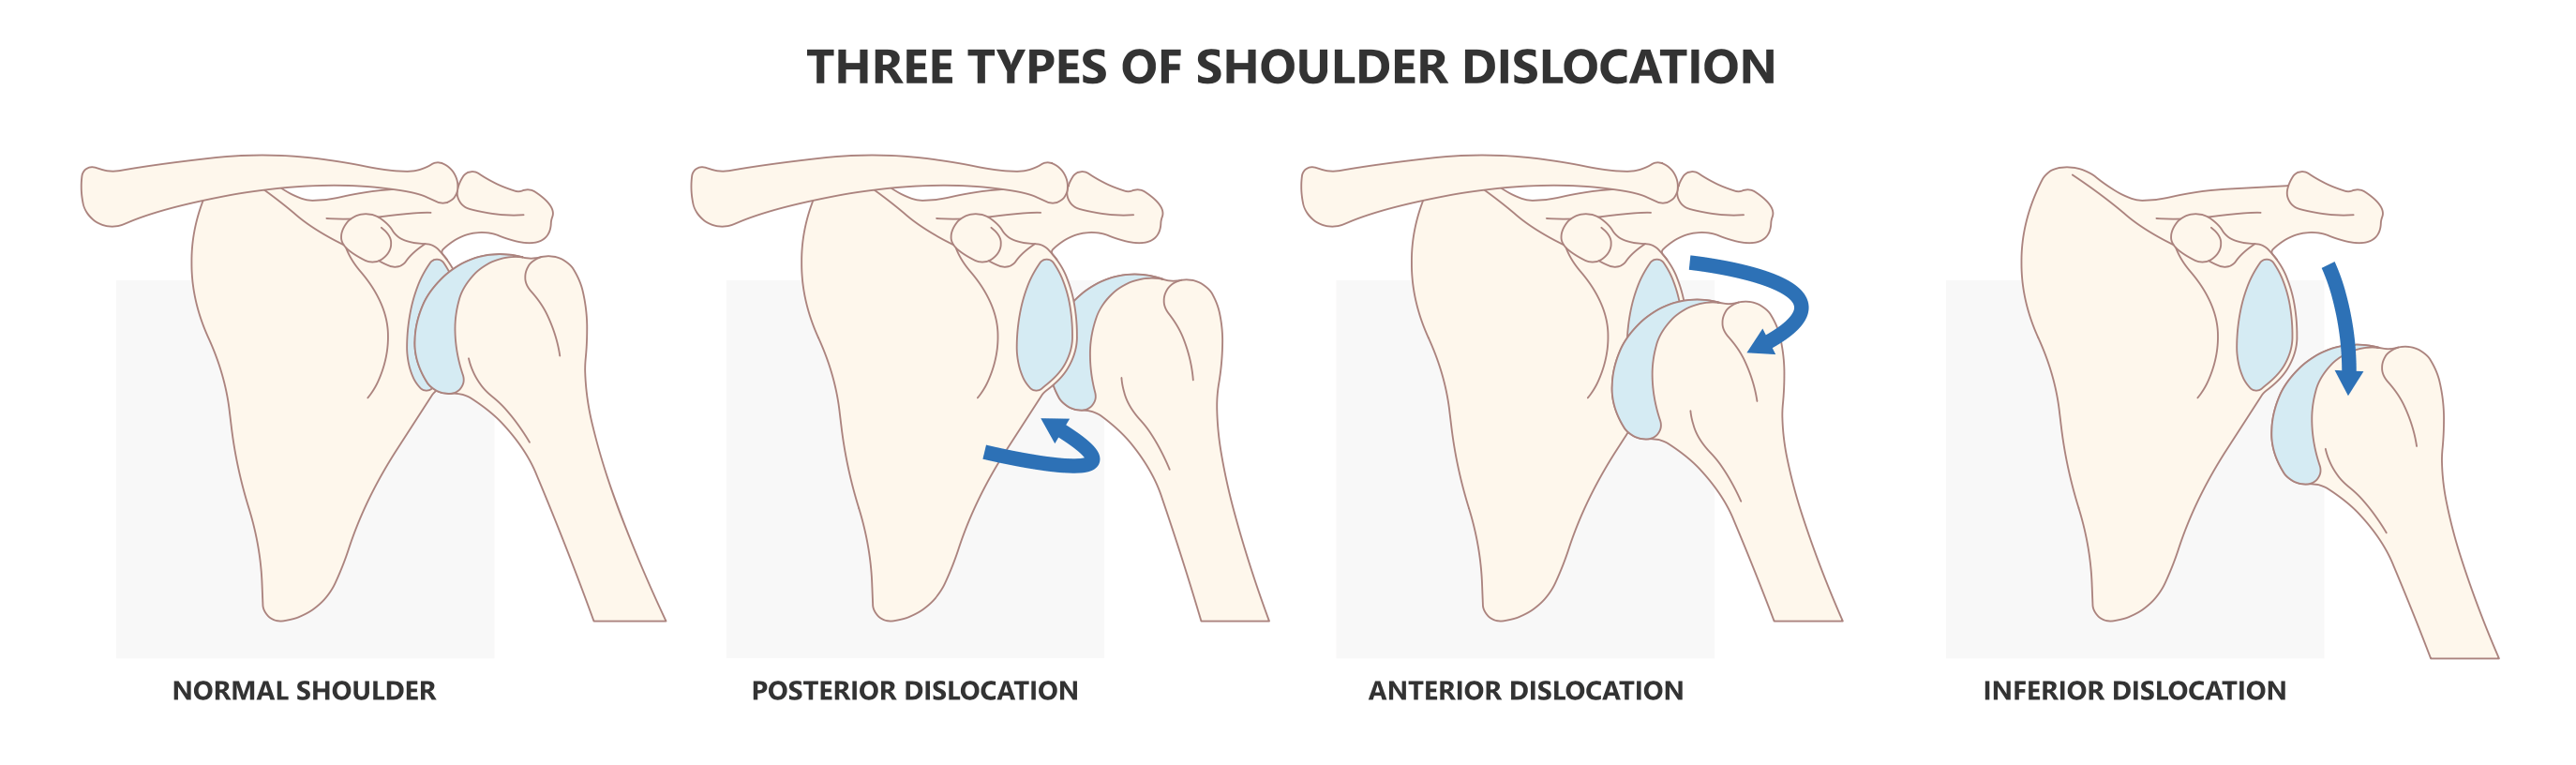 Treating Your Shoulder Dislocation and Preventing it in the Future